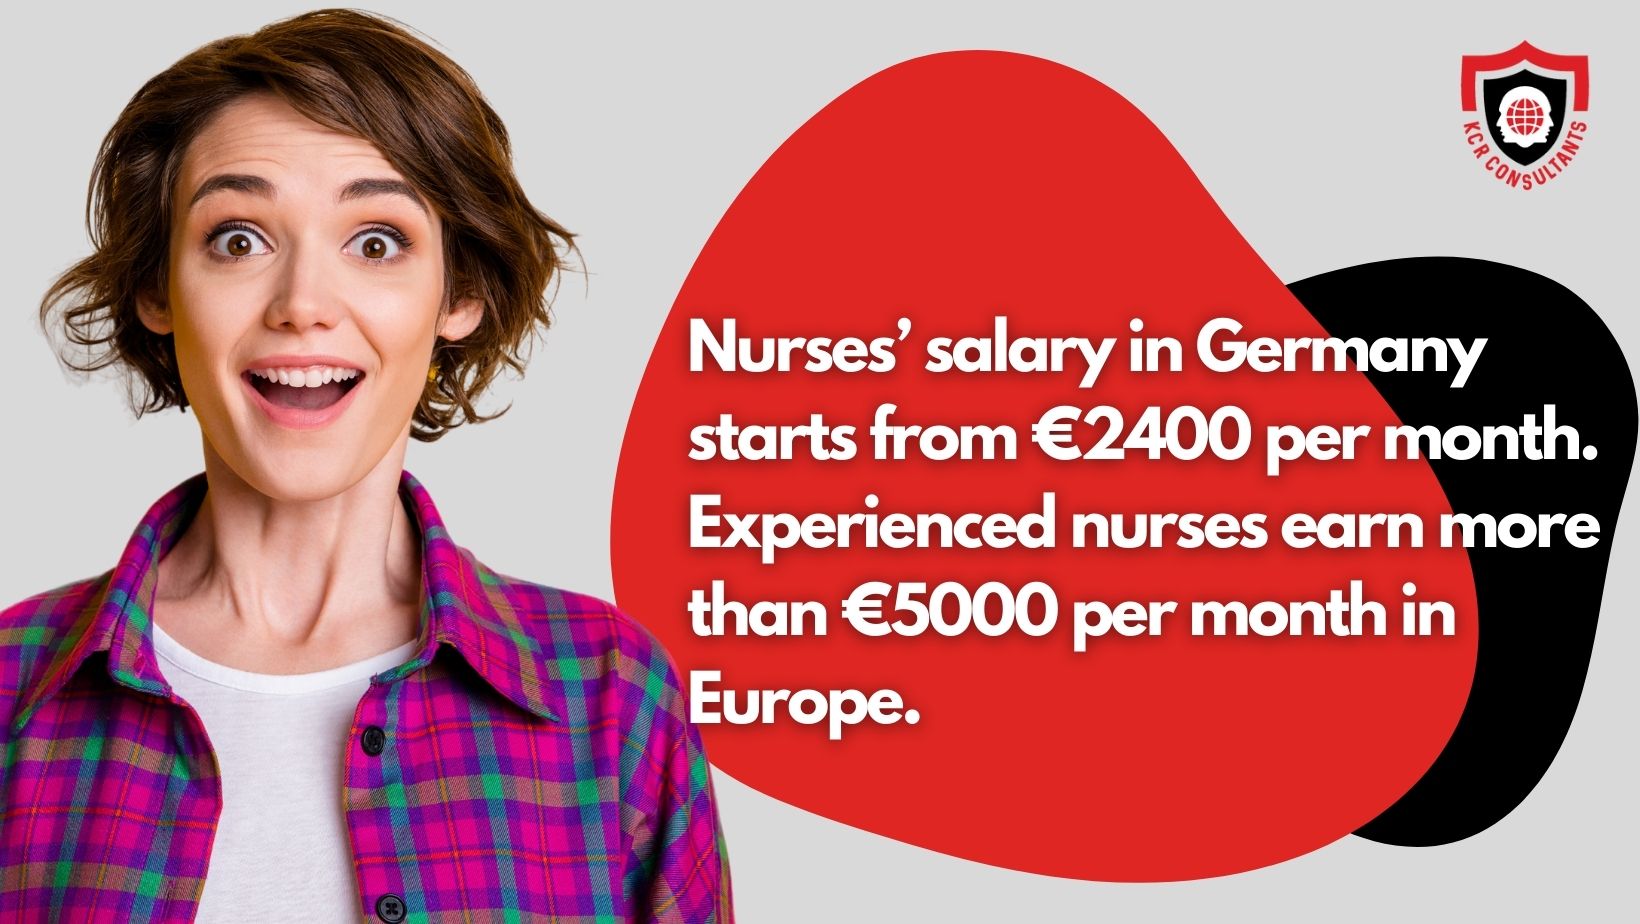 Is nursing salary in Germany better and nursing a promising career in Germany